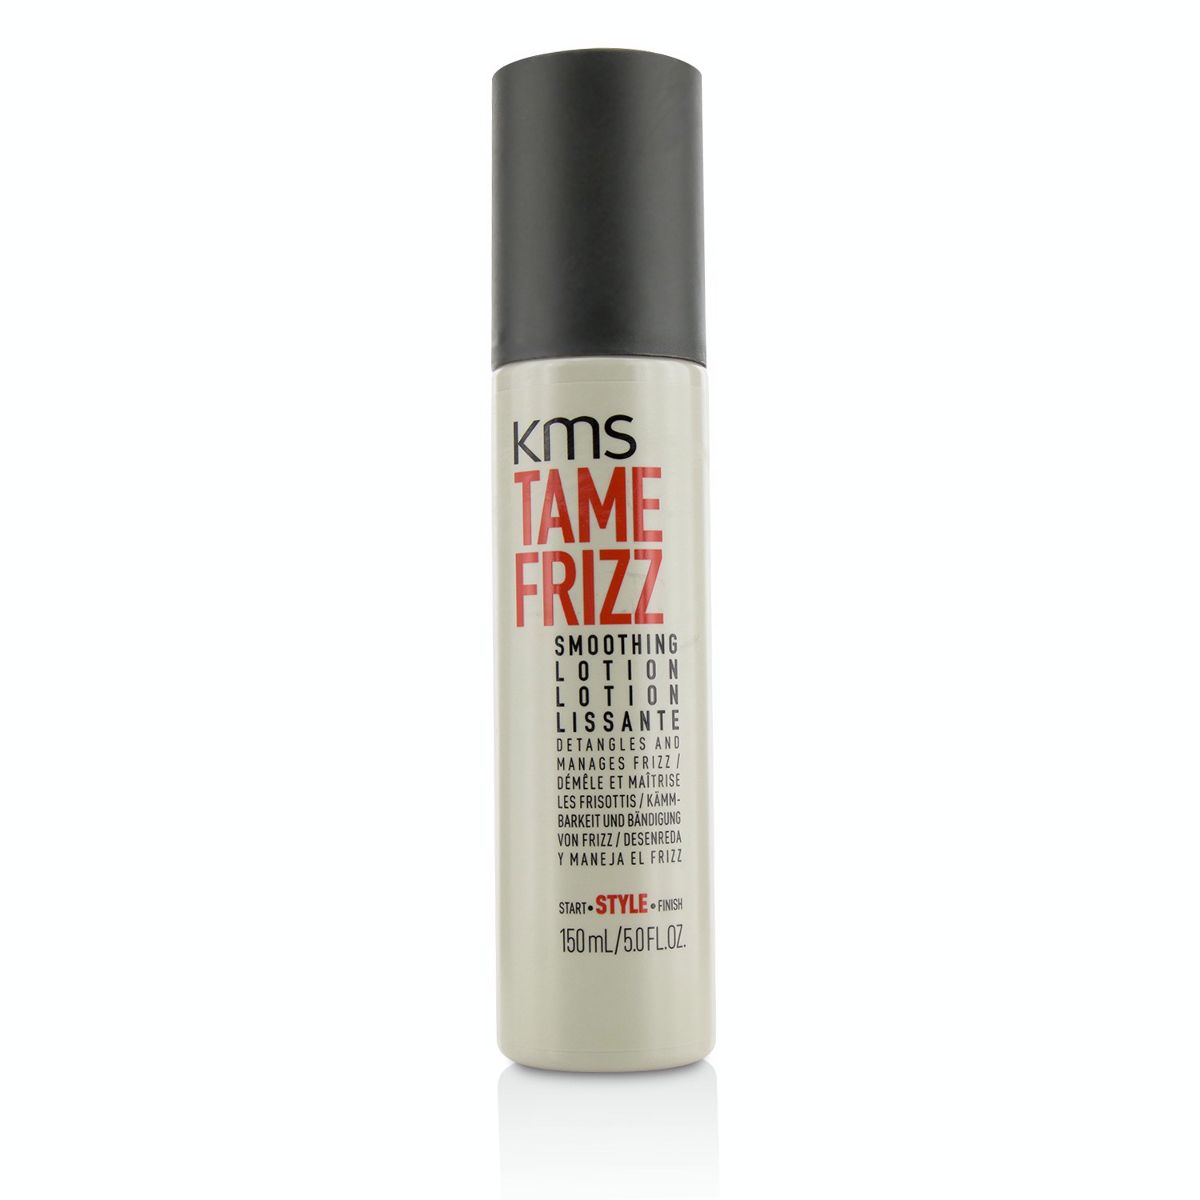 Tame Frizz Smoothing Lotion (Detangles and Manages Frizz) KMS California Image